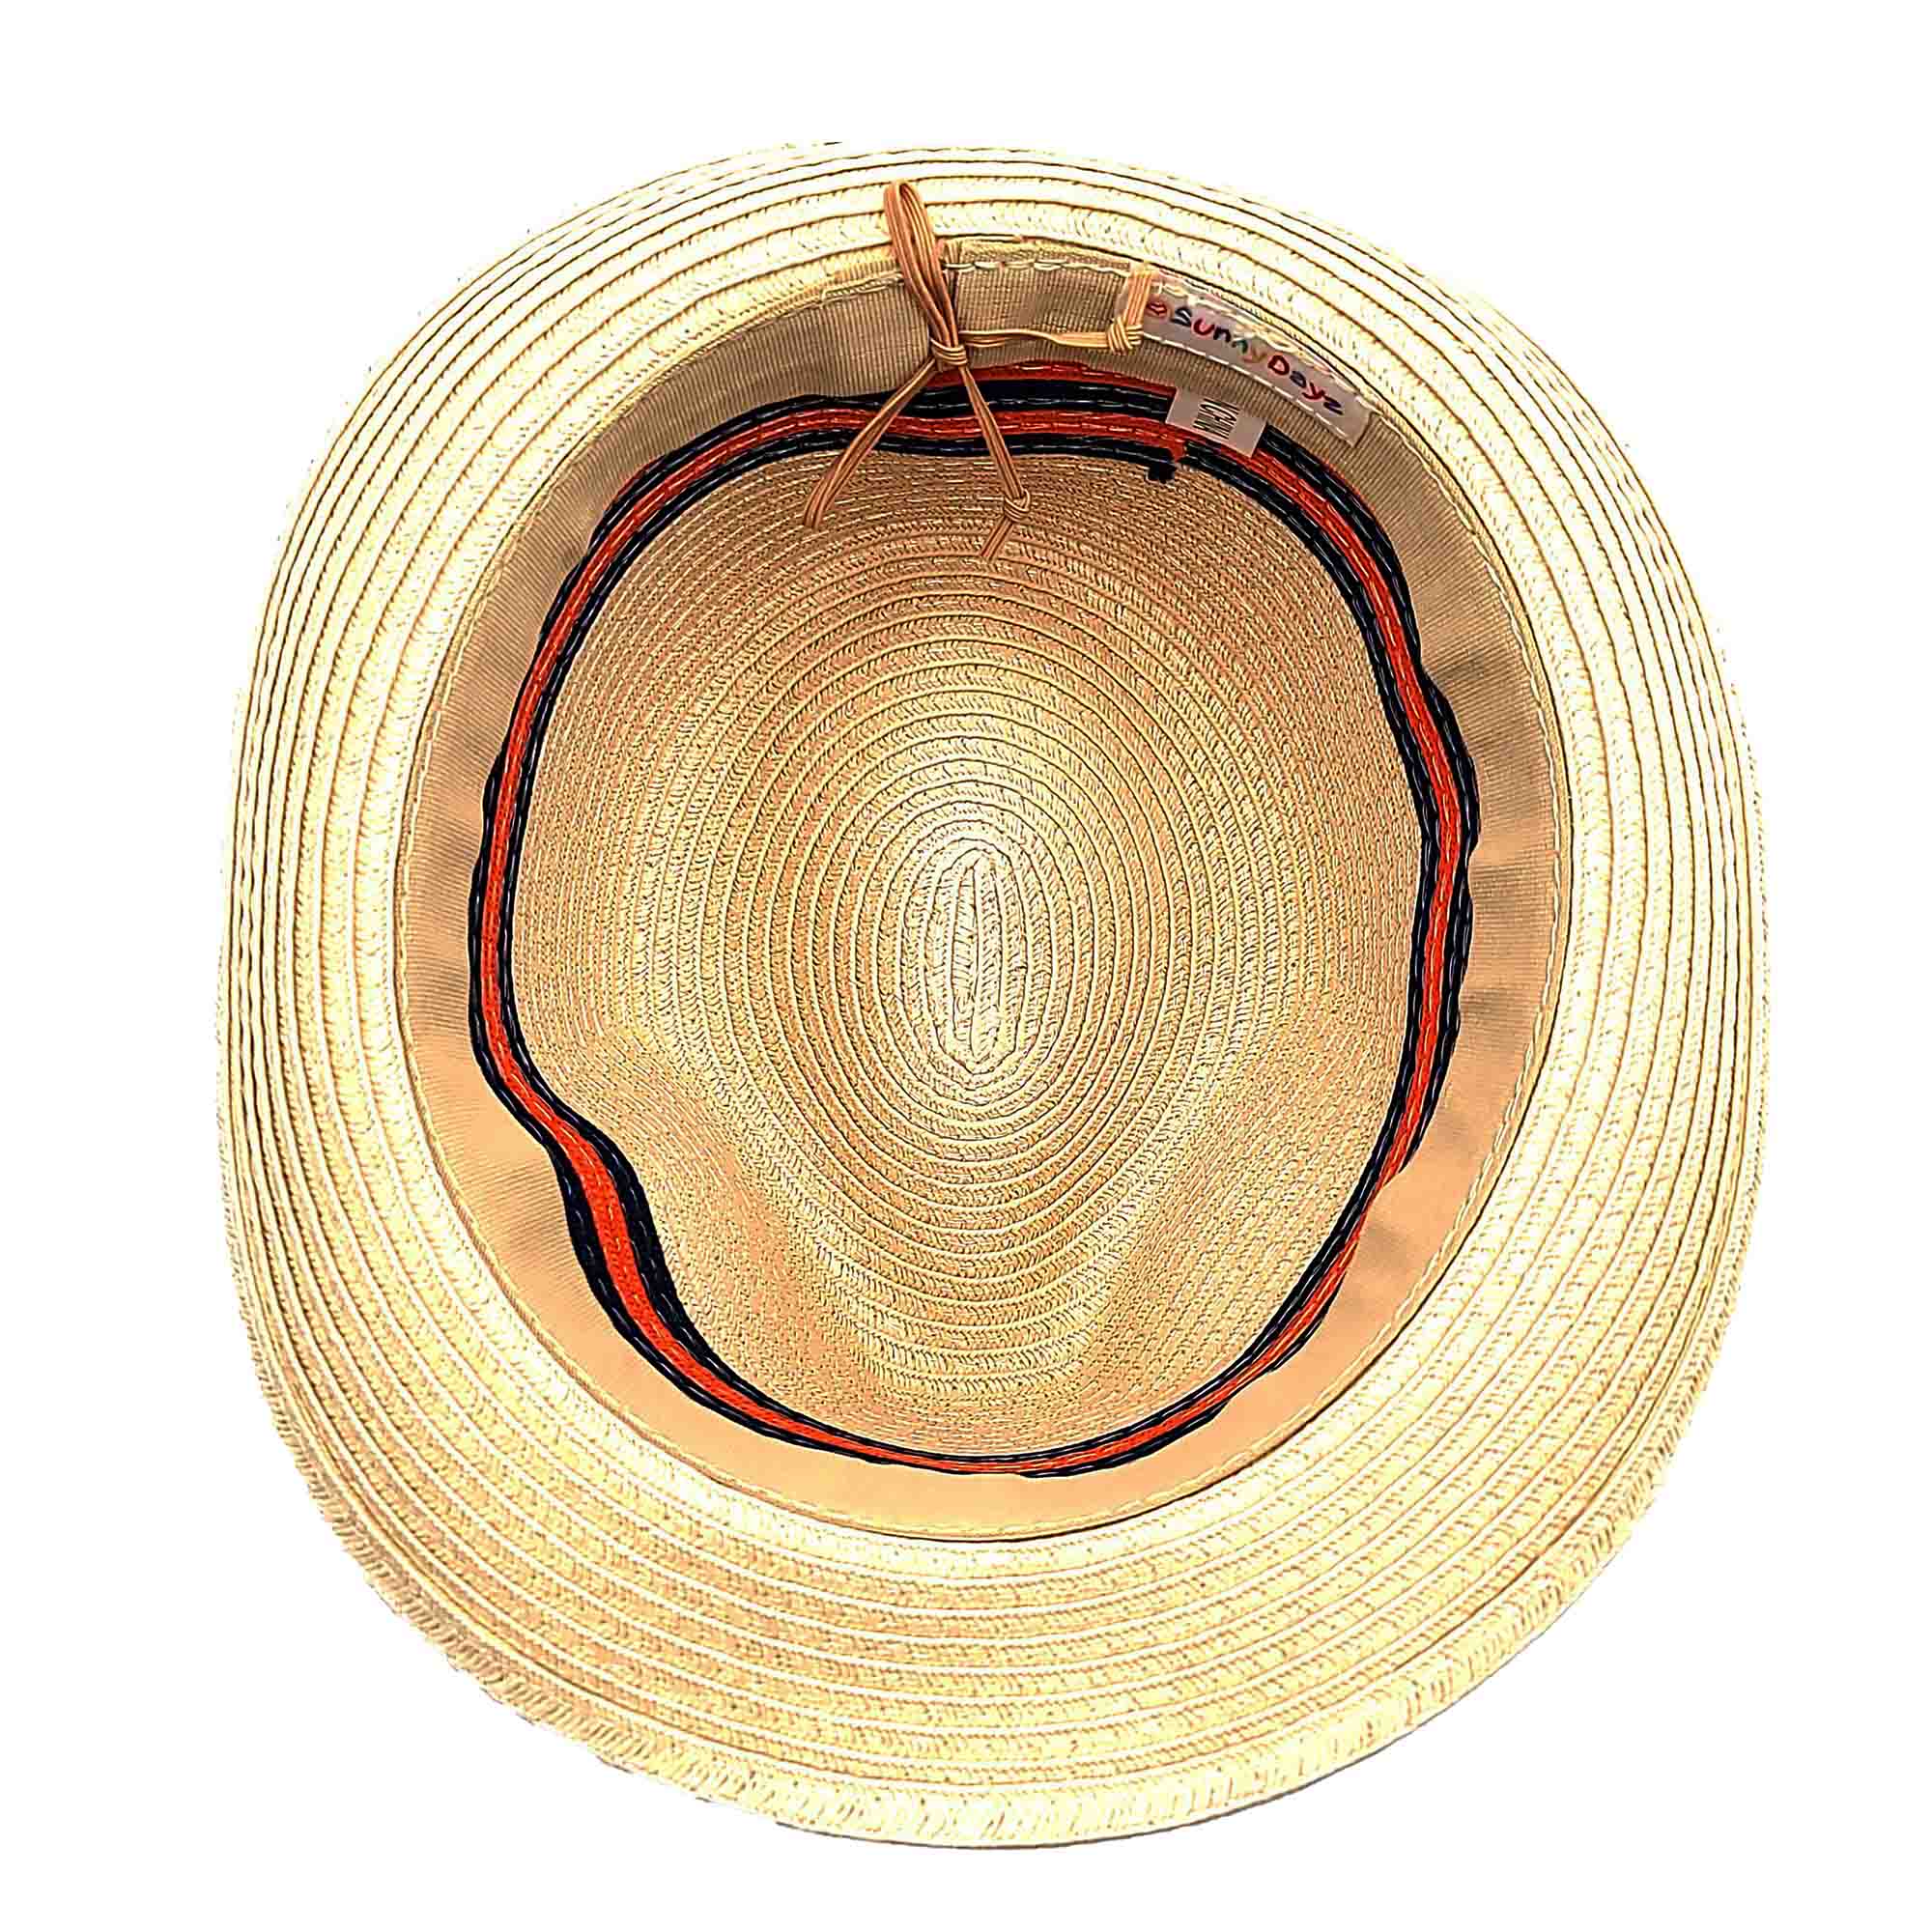 Orange and Navy Band Straw Fedora for Small Heads - Sunny Dayz™ Fedora Hat Sun N Sand Hats    